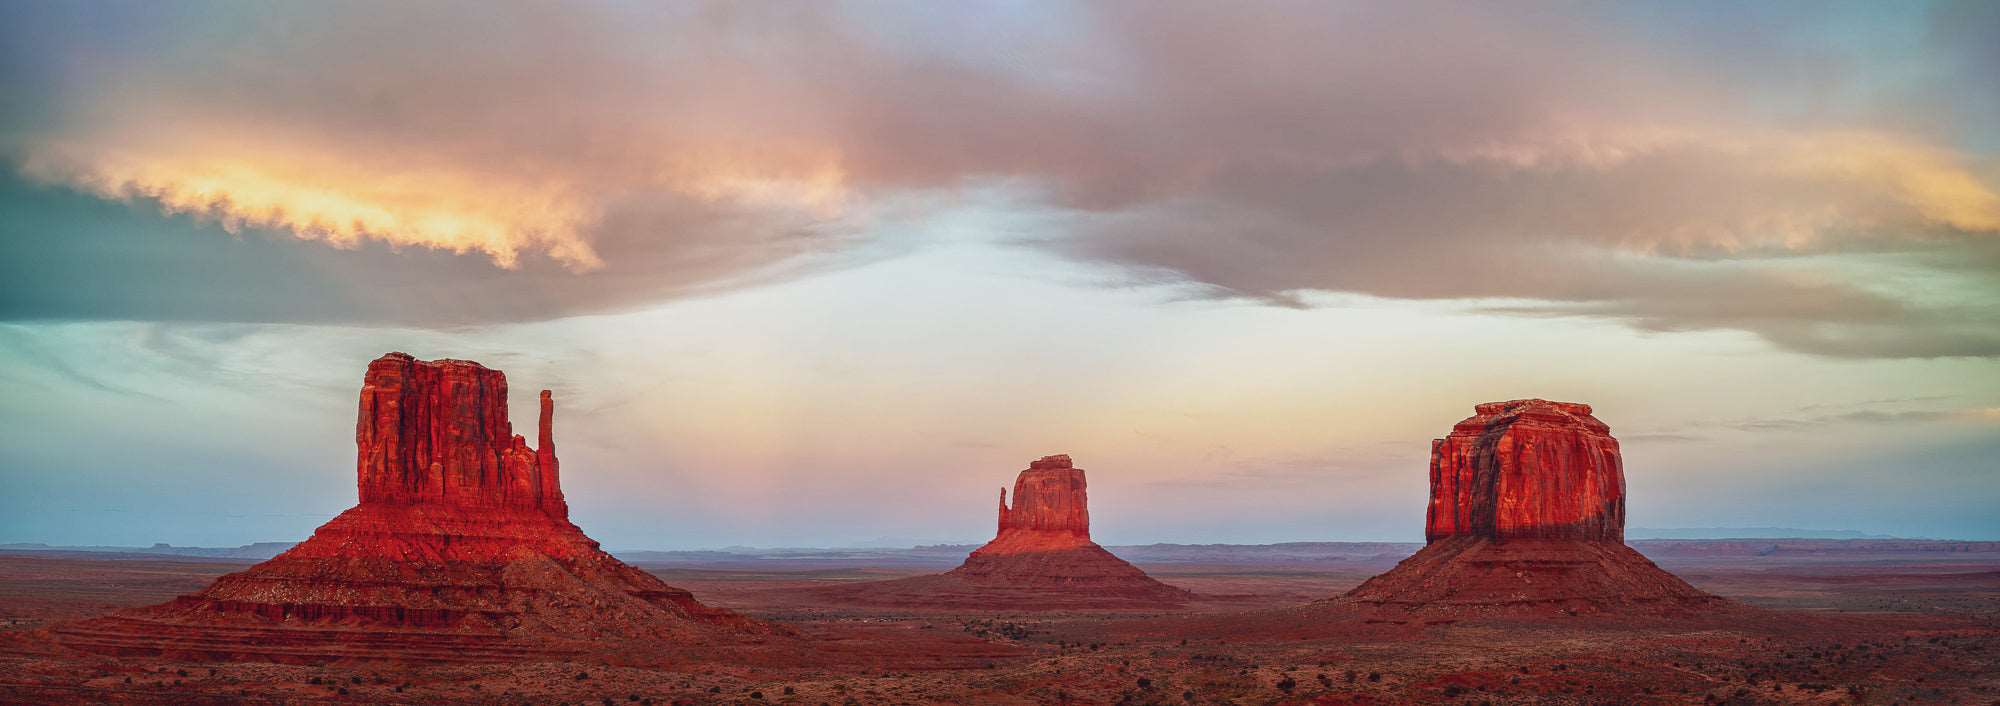 Majestic Guardians: Monument Valley Sunset Spectacle - Stephen Milner